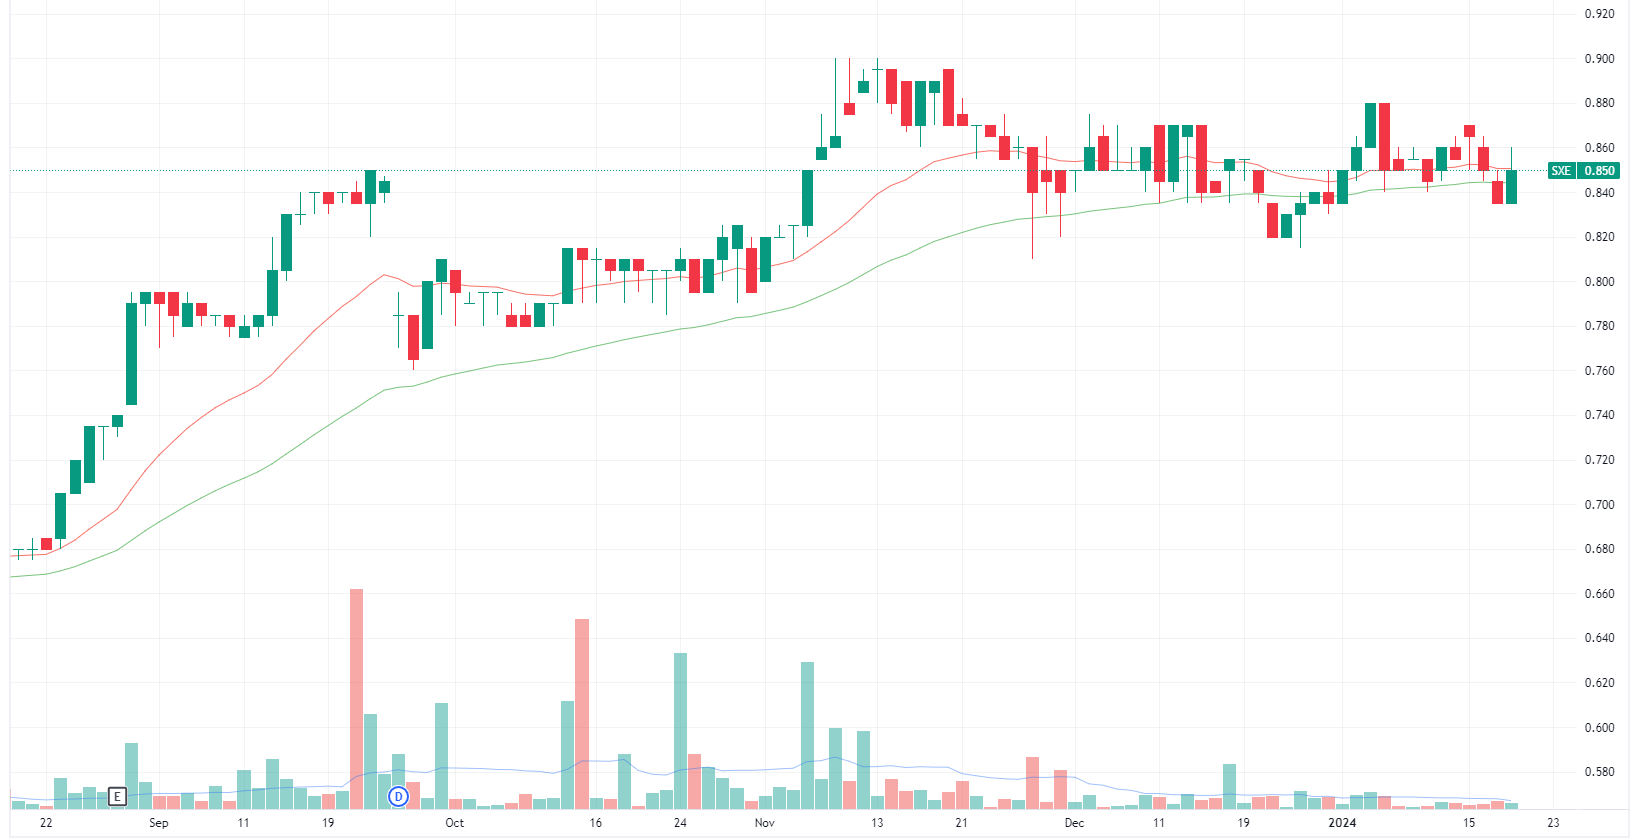 Southern Cross Electrical daily chart (Source: TradingView)